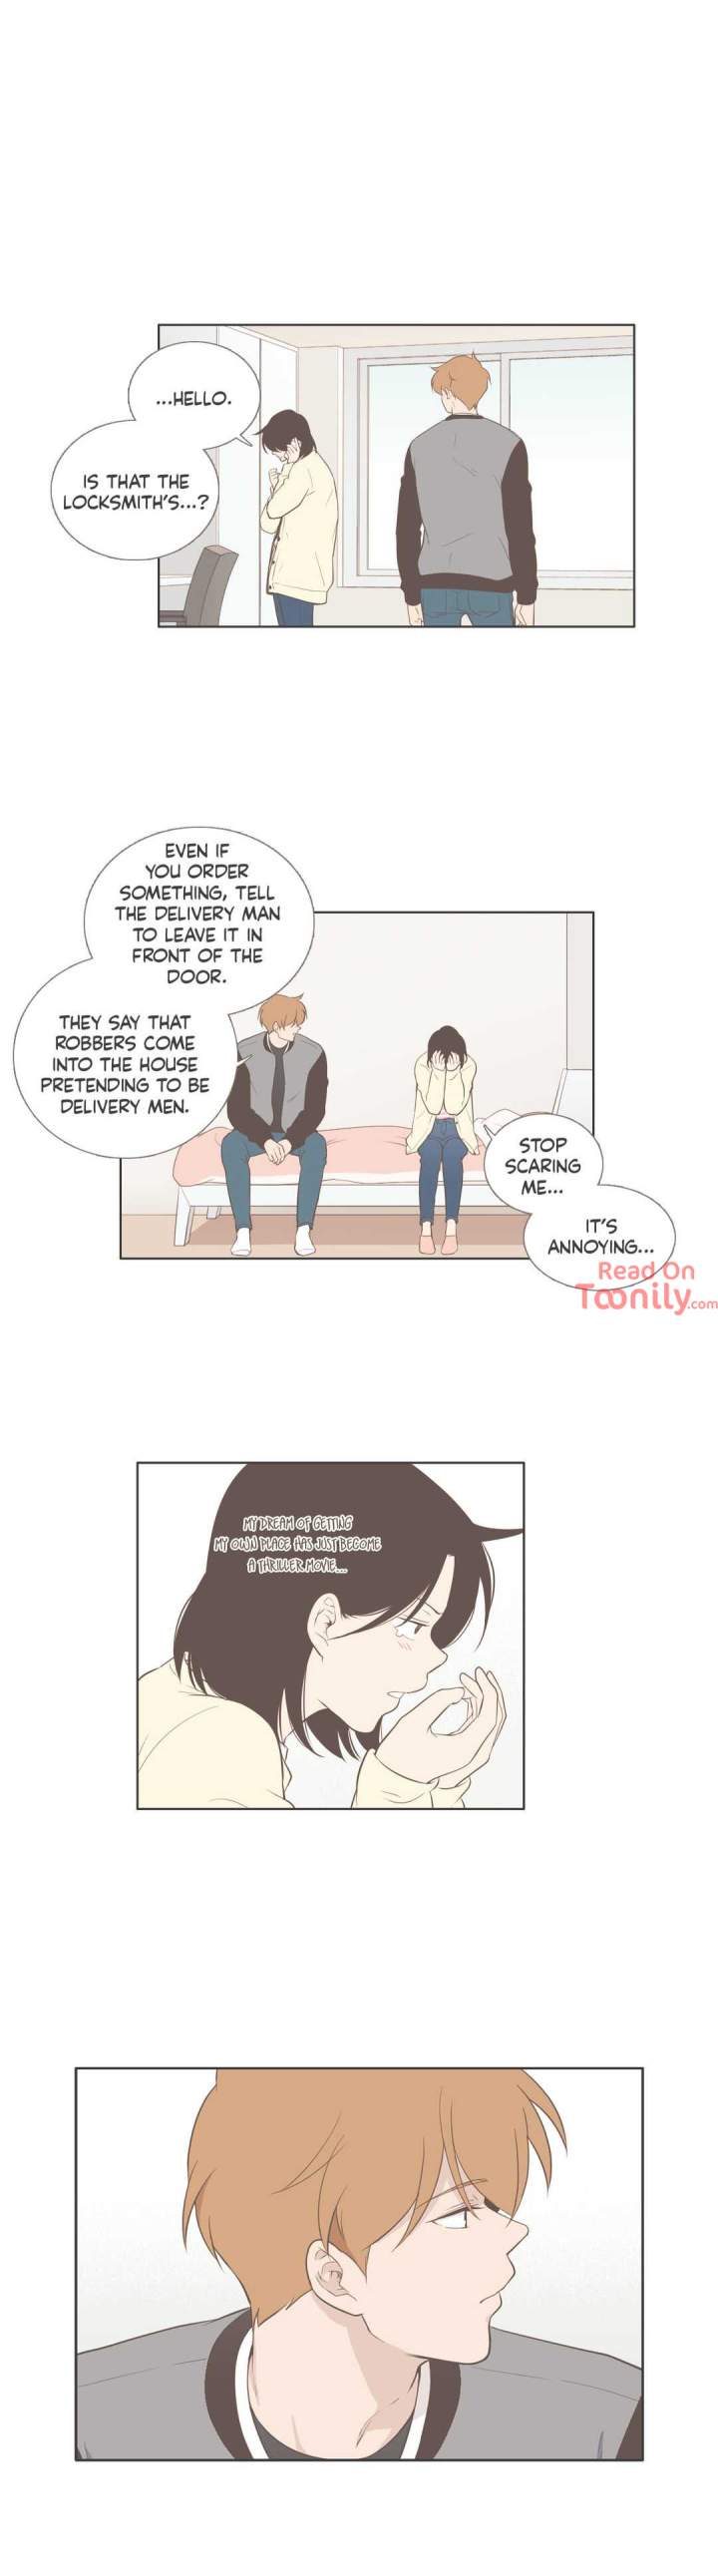 Something About Us - Chapter 74 Page 8